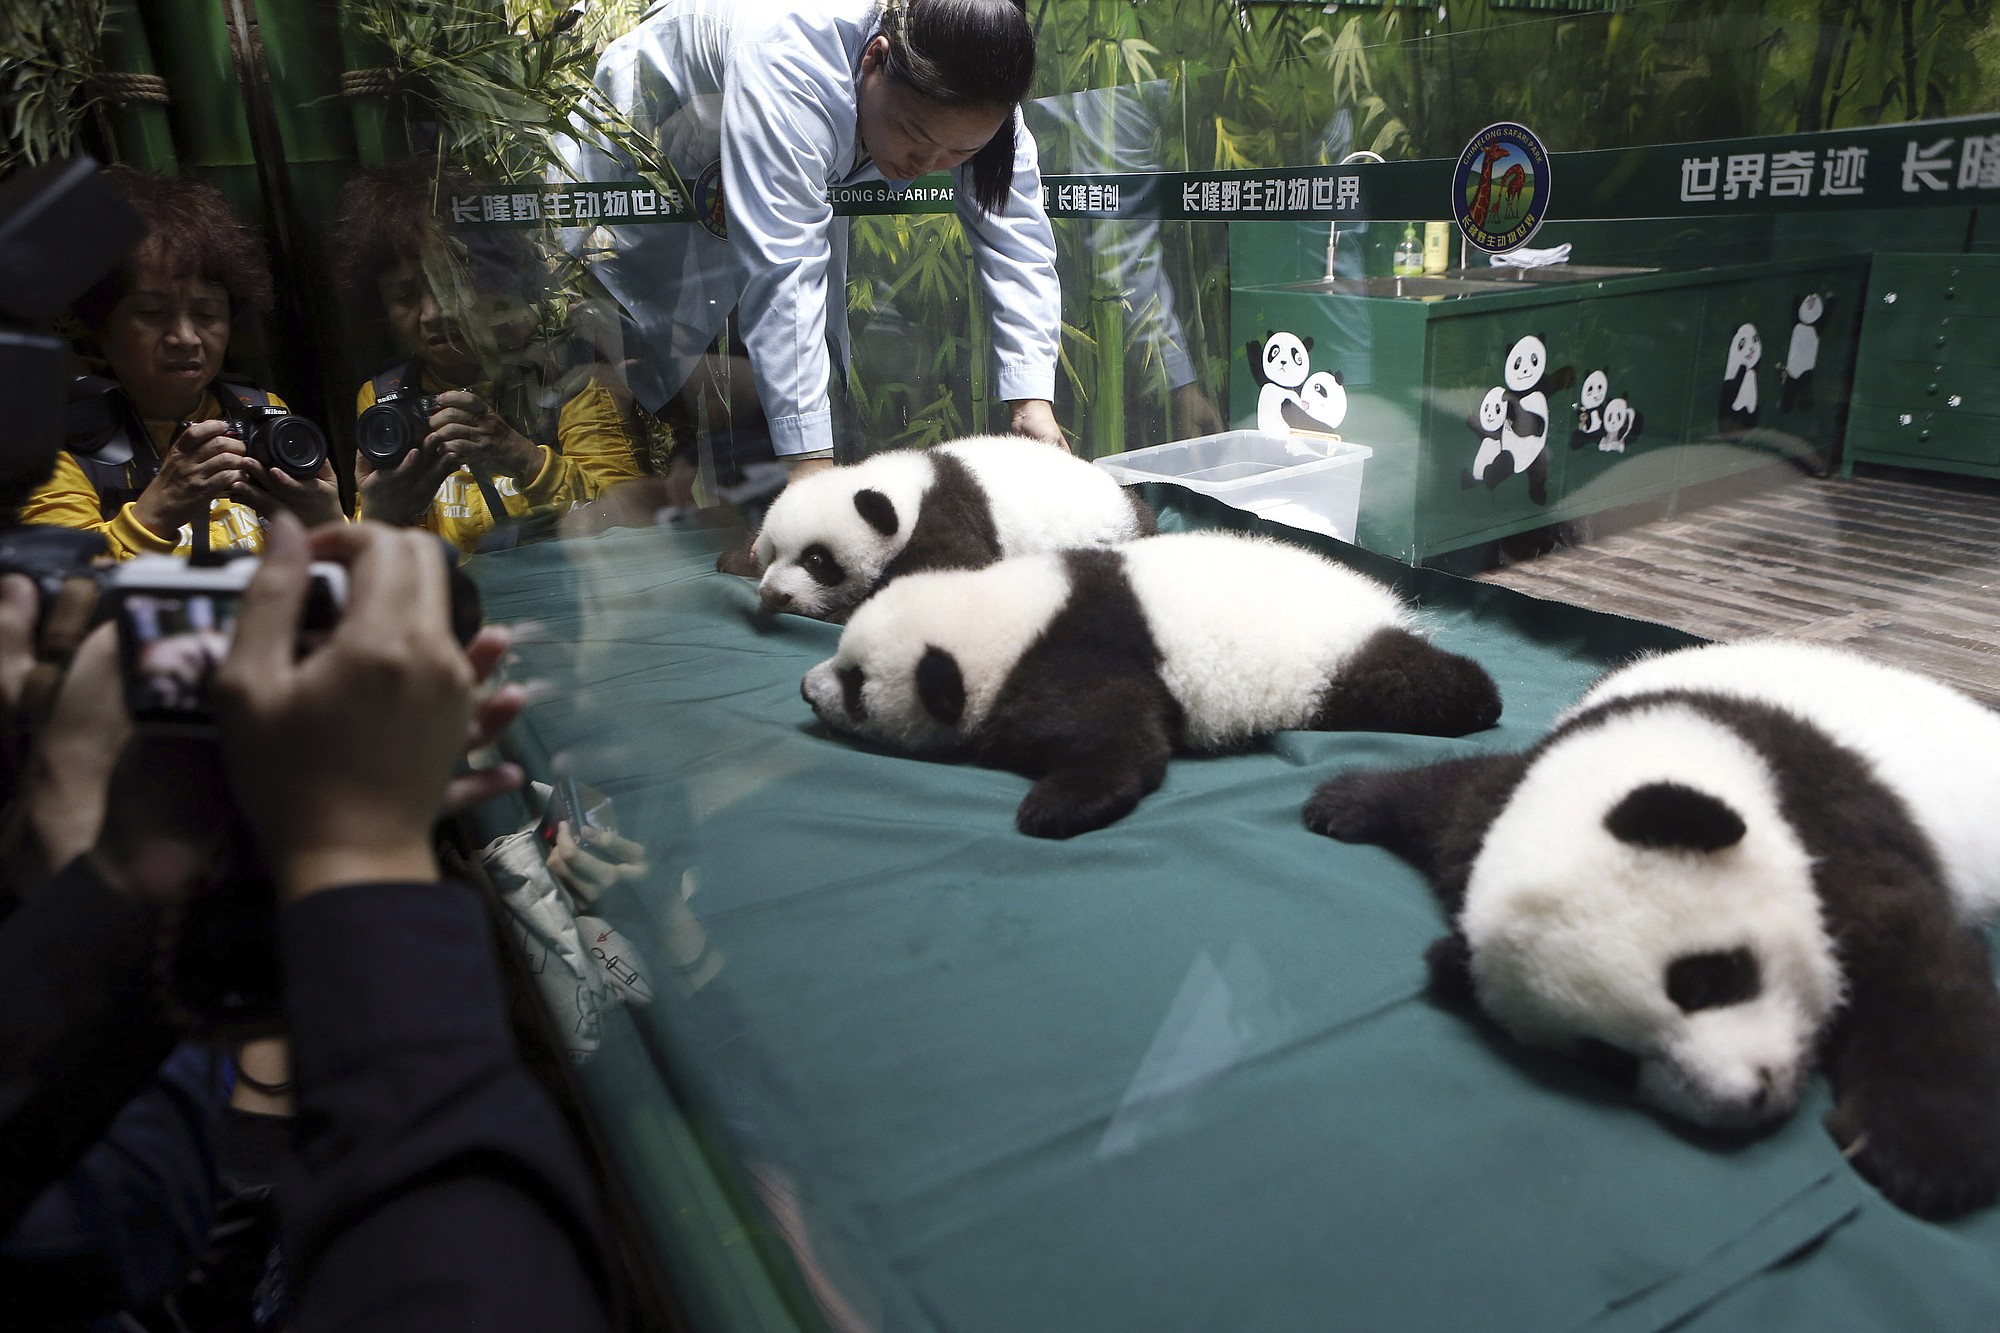 Visitors take photos in November of panda triplet cubs in the Chimelong Safari Park in Guangzhou in south China's Guangdong province.